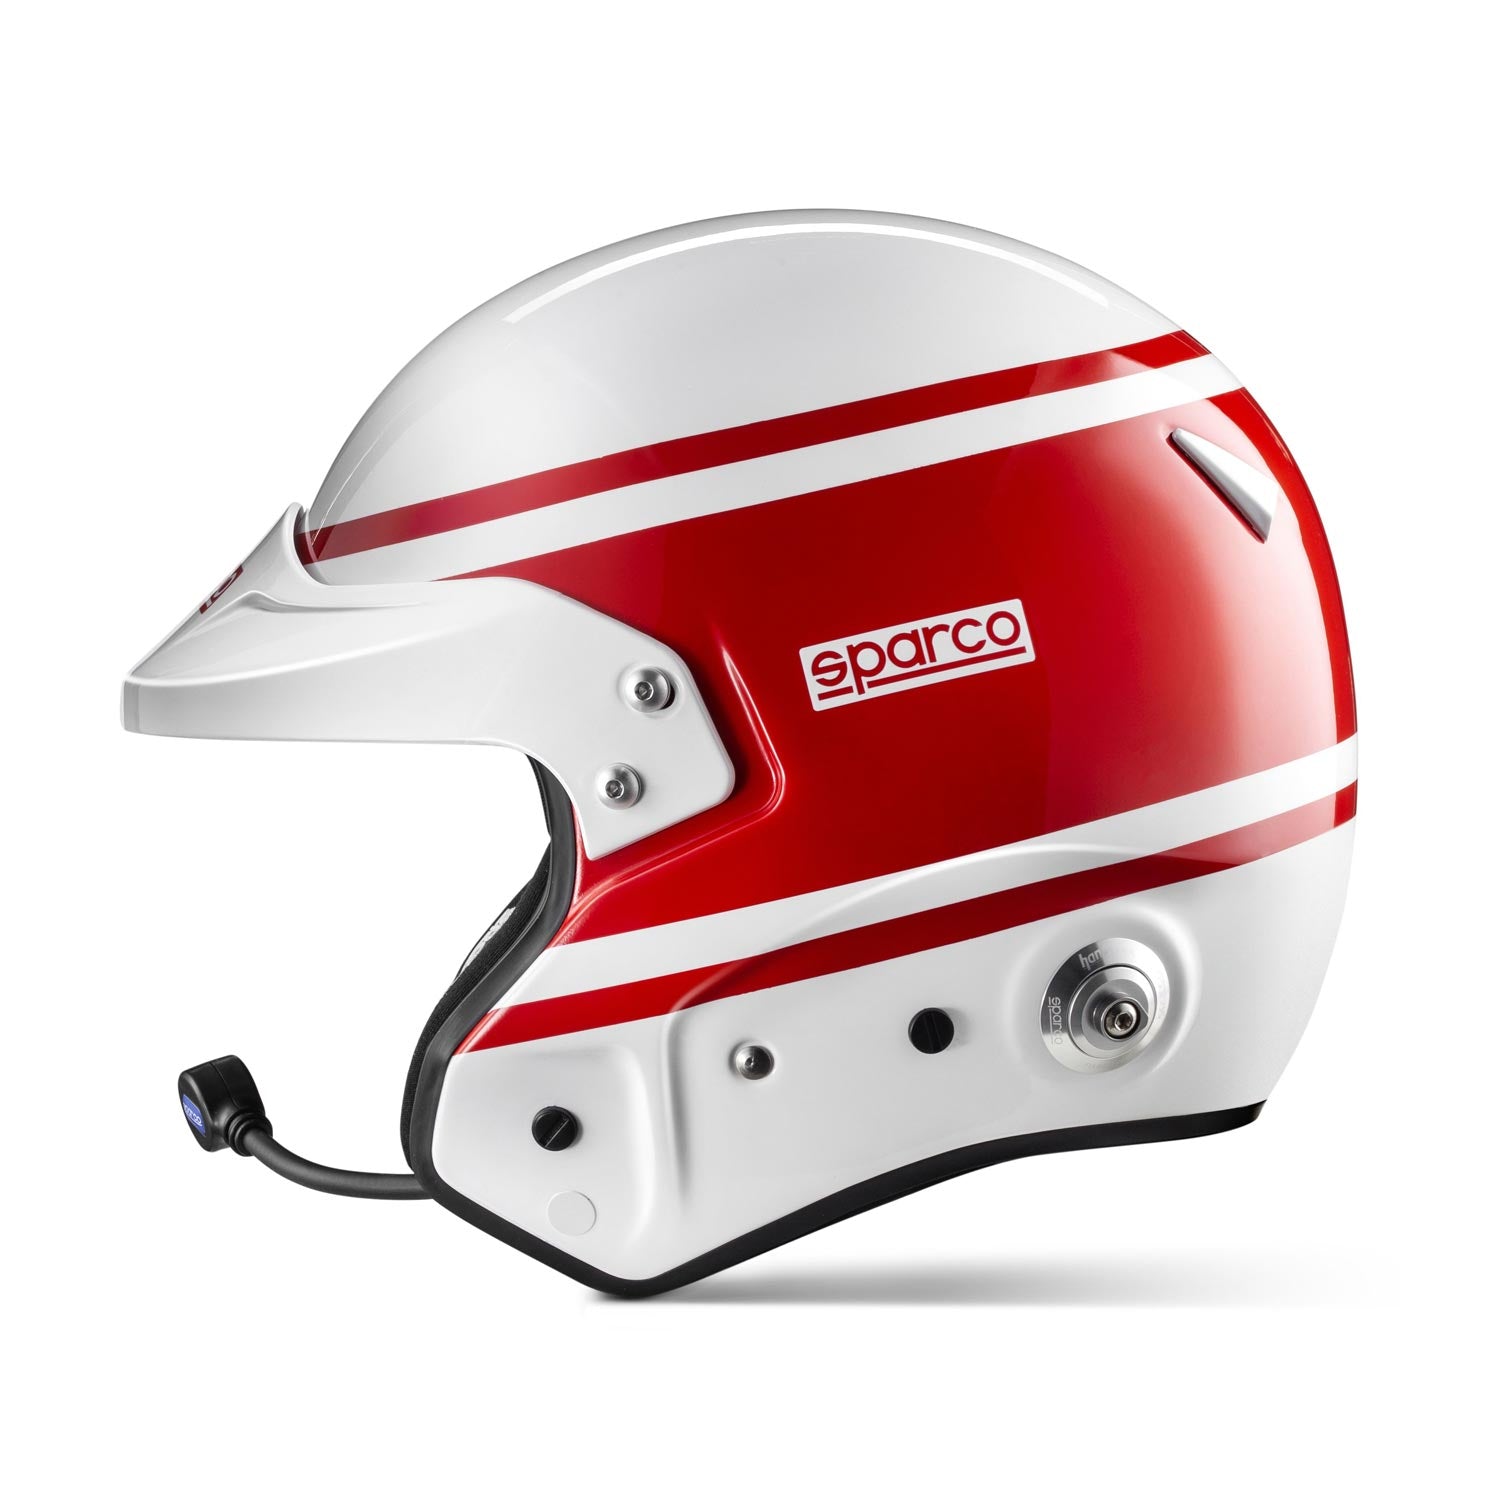 SPARCO 003369RS3ML RJ-i 1977 Racing helmet open-face, FIA/SNELL SA2020, red/white, size M+ (59) Photo-1 